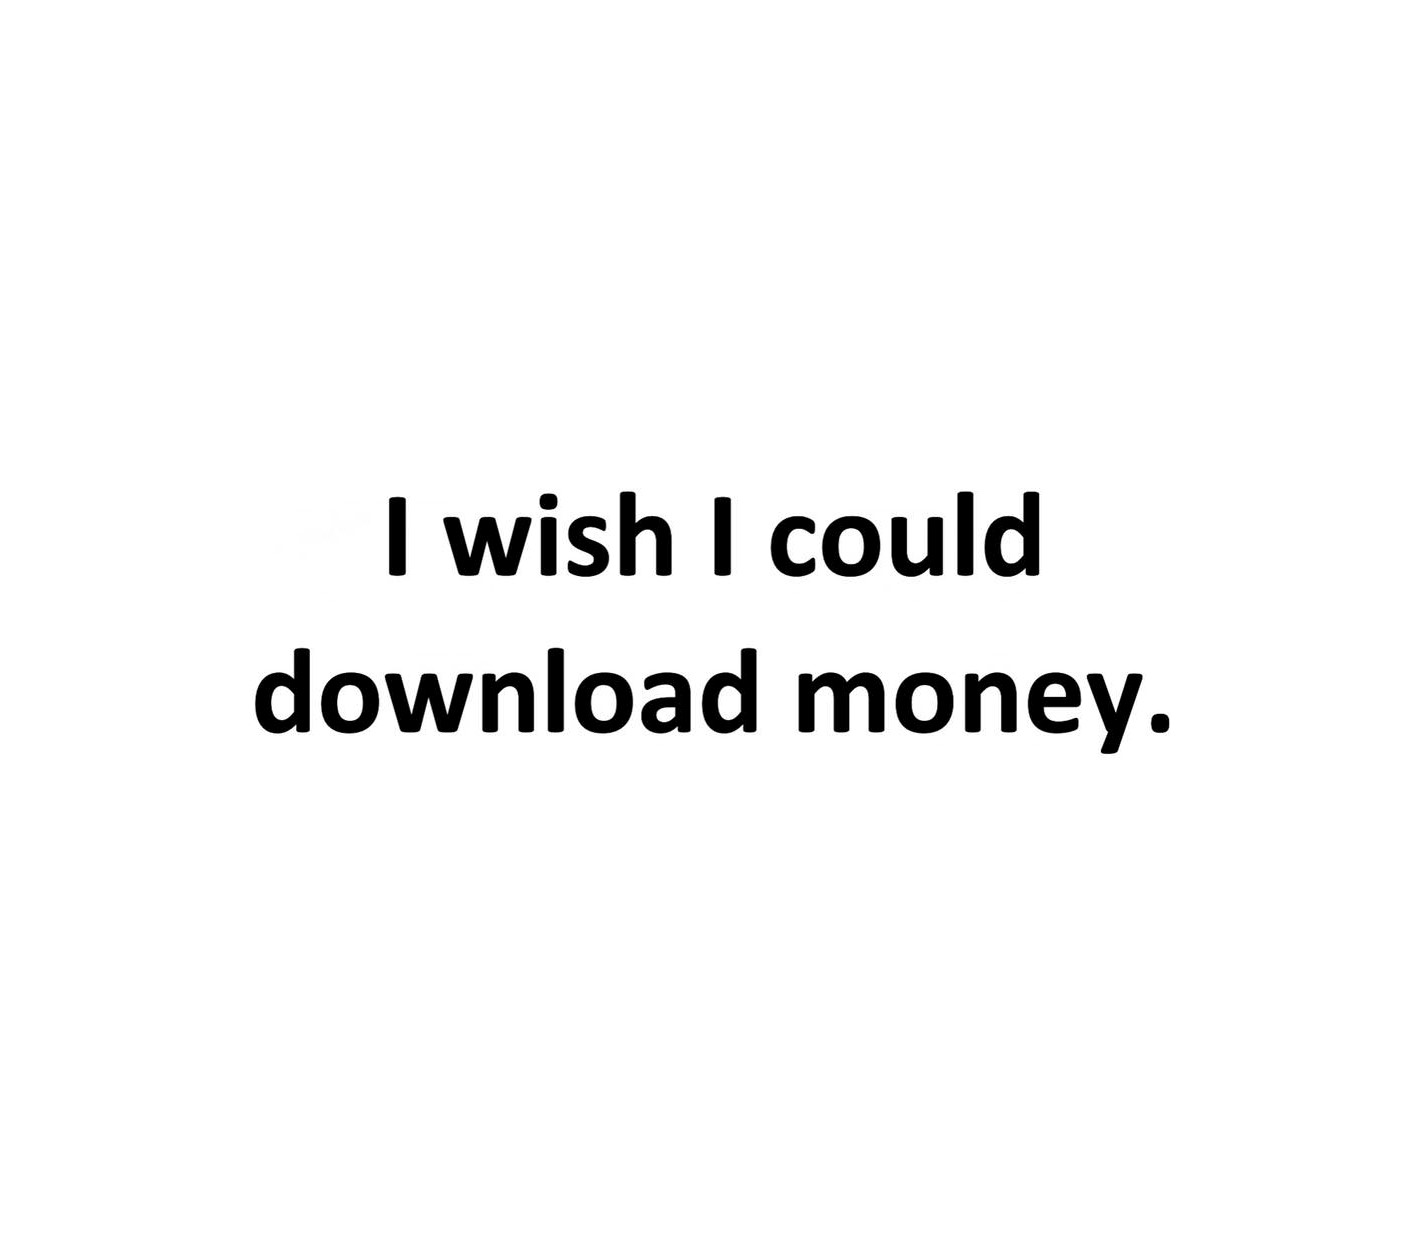 I wish I could download money